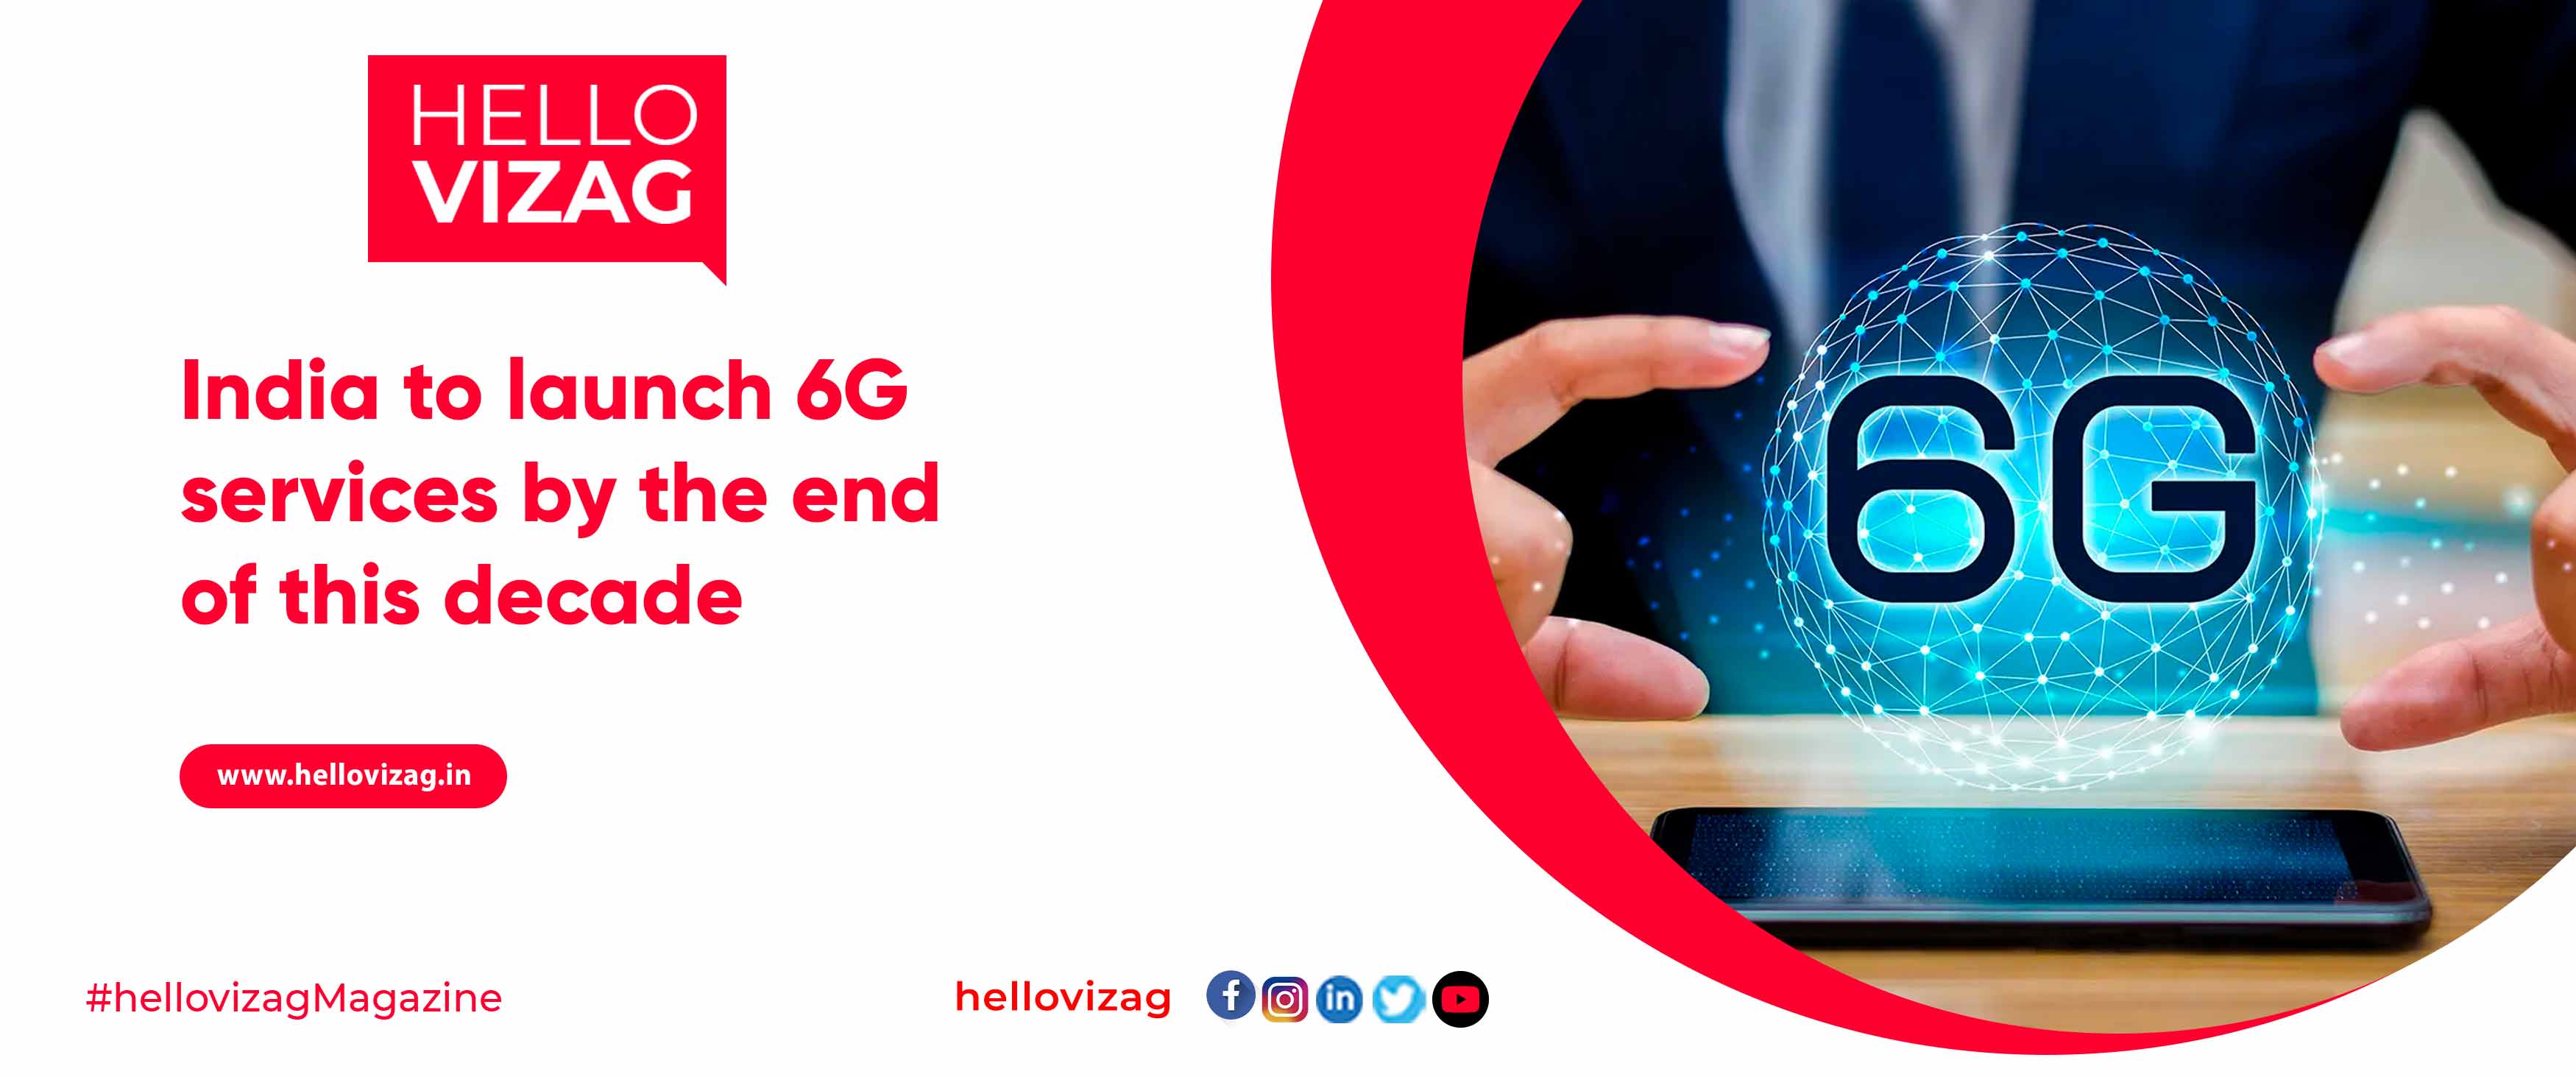 India to launch 6G services by the end of this decade